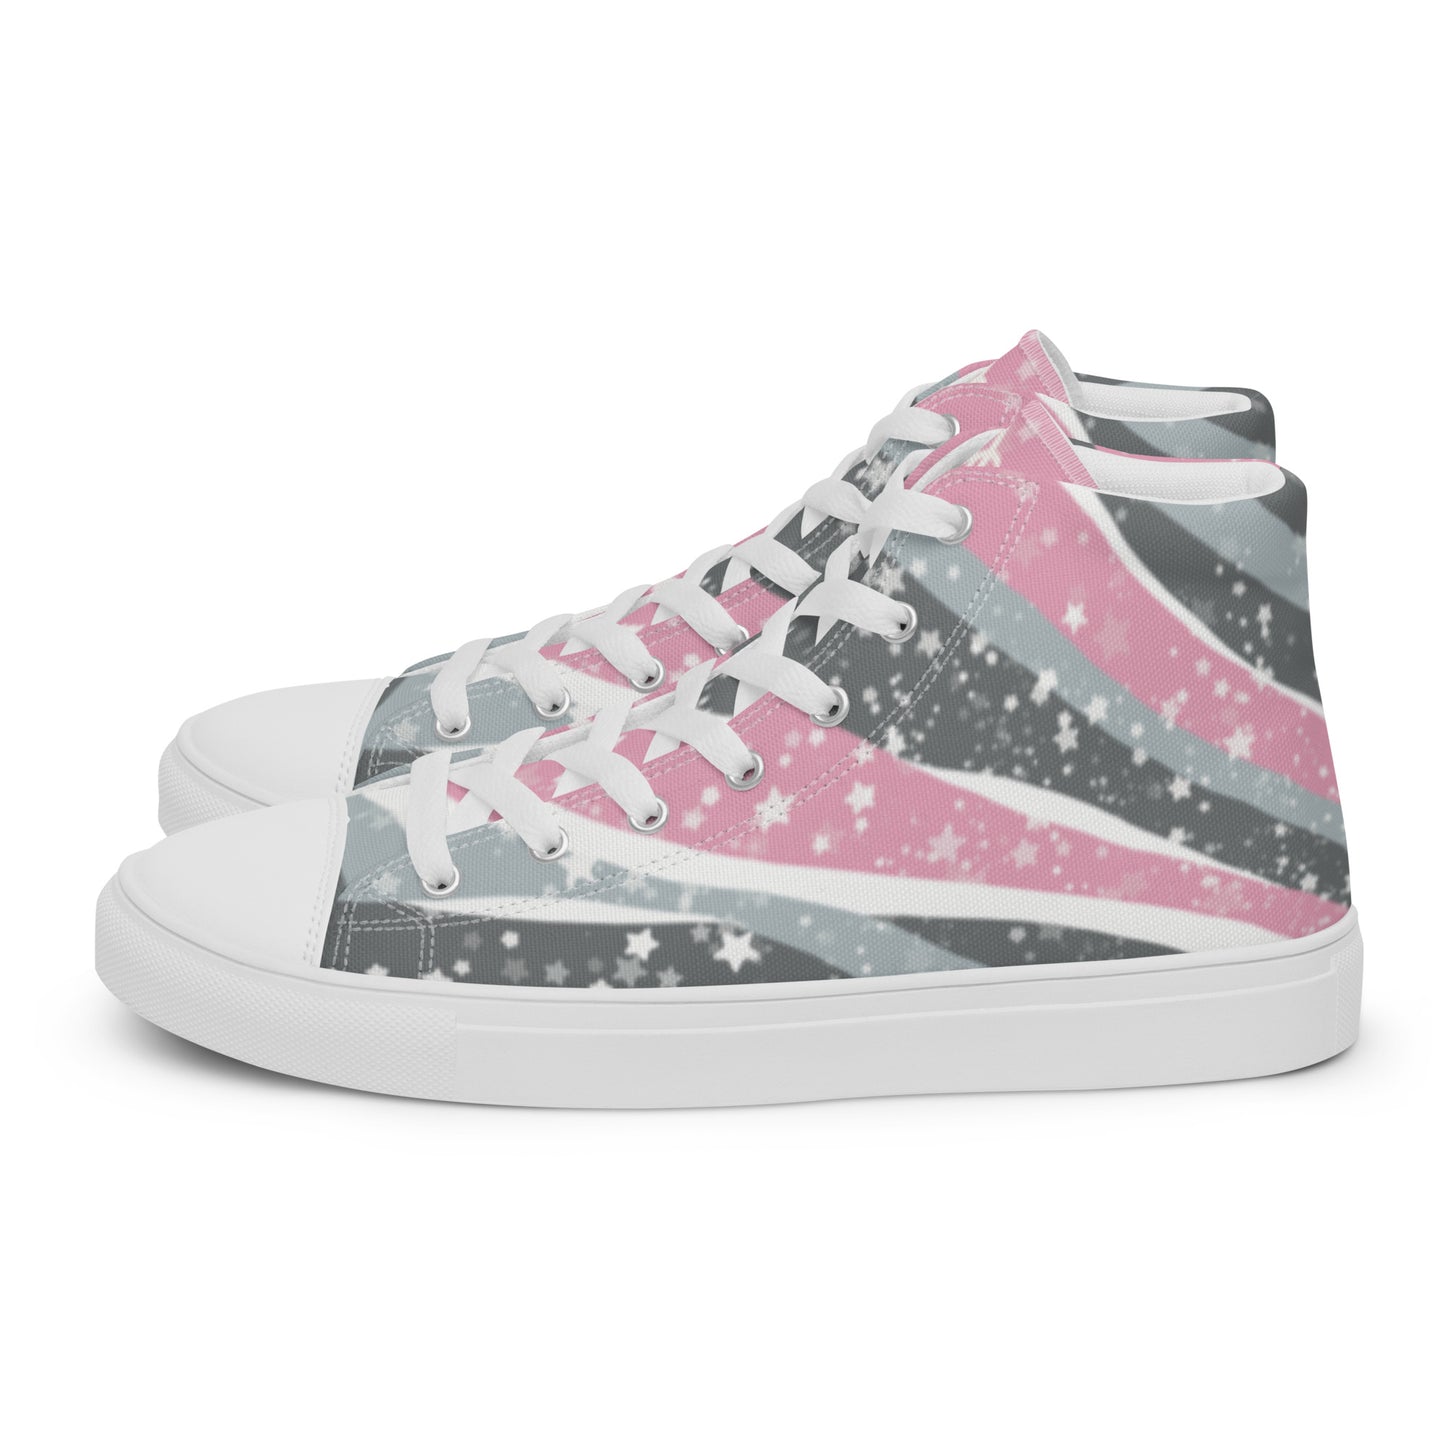 Left view: A pair of high top shoes with ribbons of the demigirl flag colors and stars coming from the heel and getting larger across the shoe to the laces.